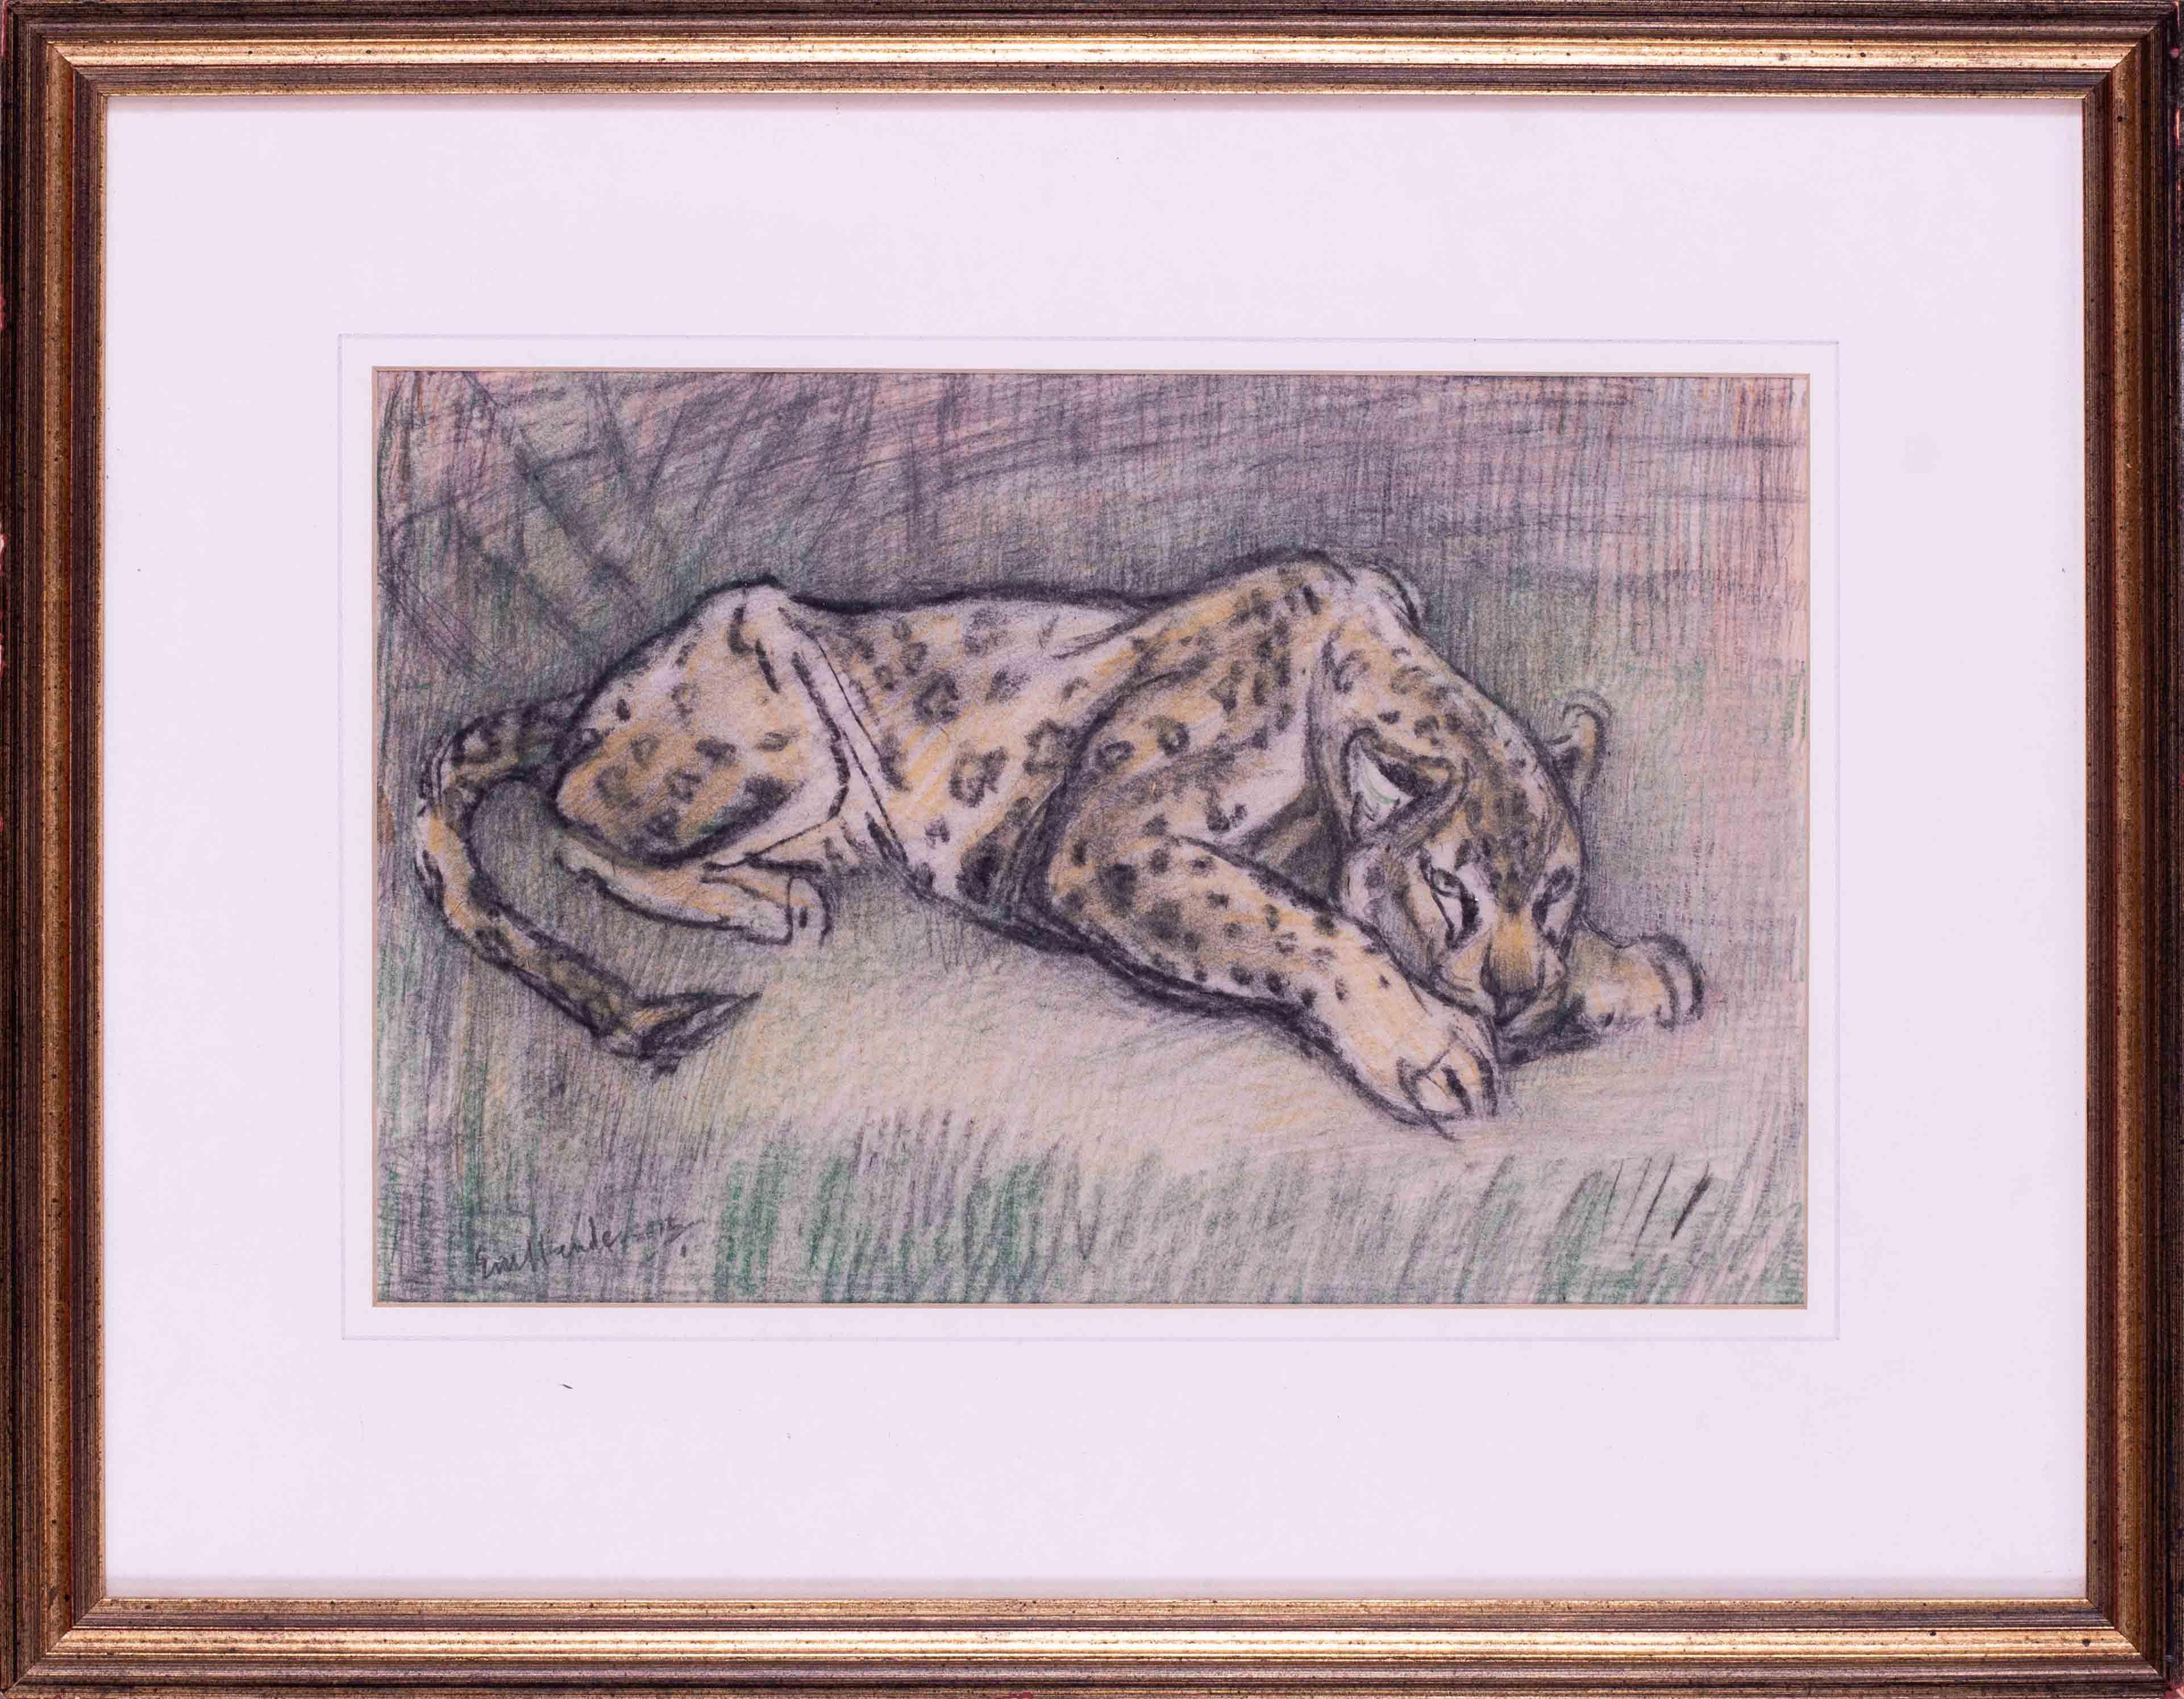 Elsie Marian Henderson (British, 1880-1967)
Crouching Leopard
Charcoal and pastel on paper
8 x 12.1/8 in. (20.3 x 30.8 cm.)
Provenance: The estate of the artist
Sally Hunter Fine Art, London

Elsie Marian Henderson was born in Eastbourne in Sussex